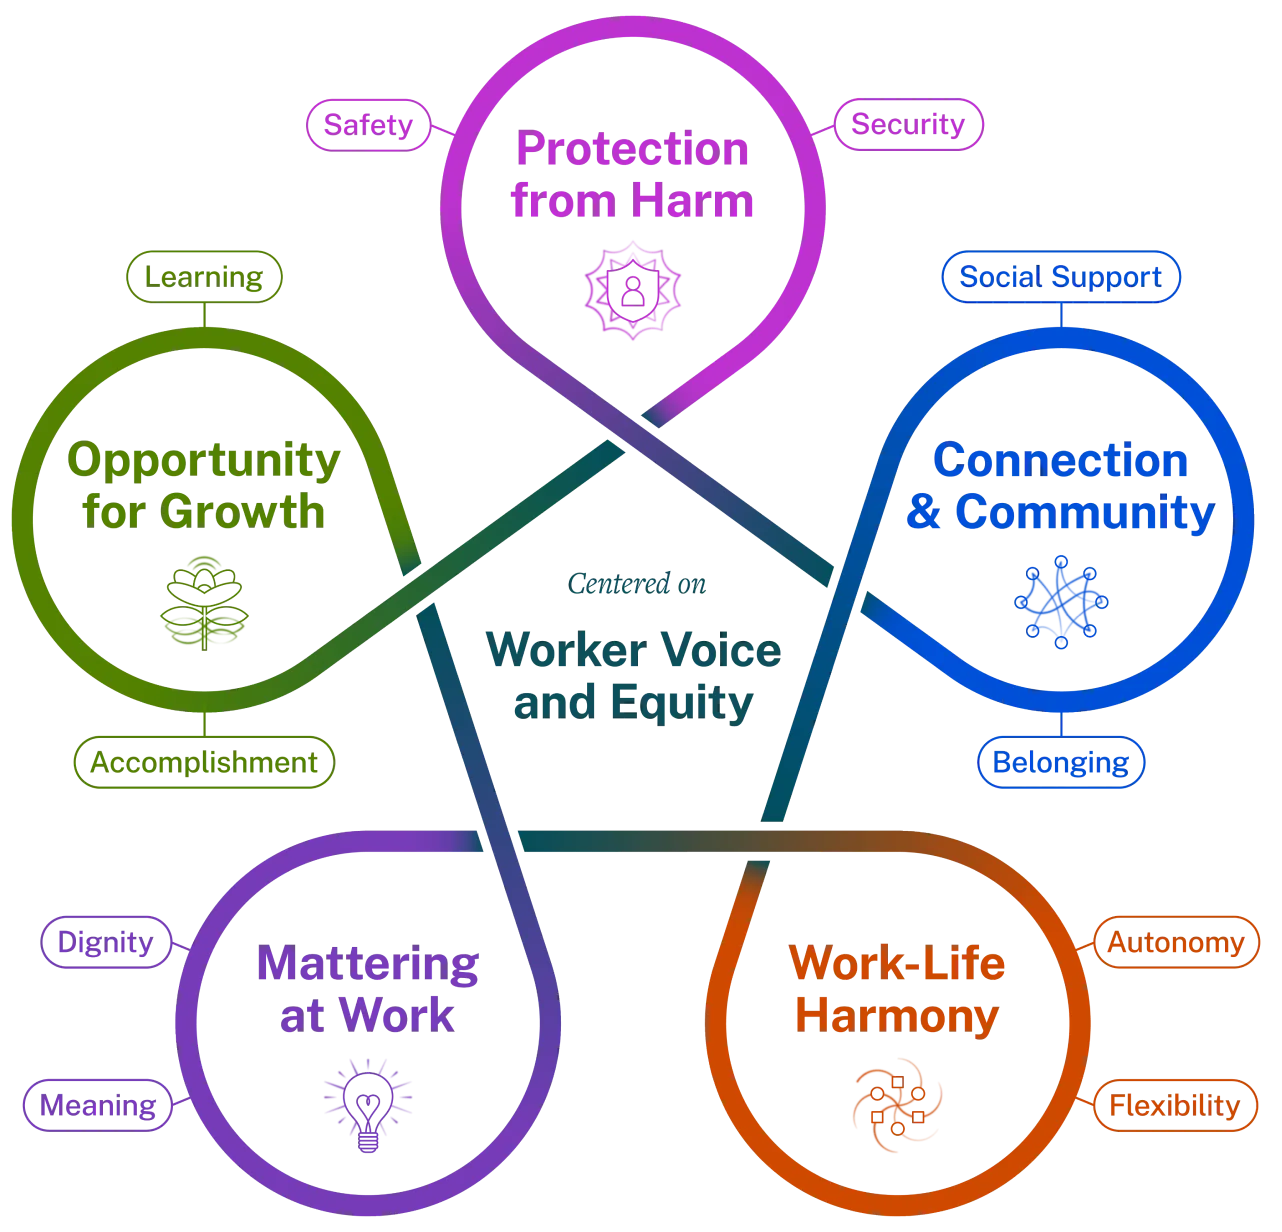 Illustration of five essentials—Protection from Harm, Connection and Community, Work-Life Harmony, Mattering at Work, Opportunity for Growth—in a circle with Worker Voice and Equity in the center